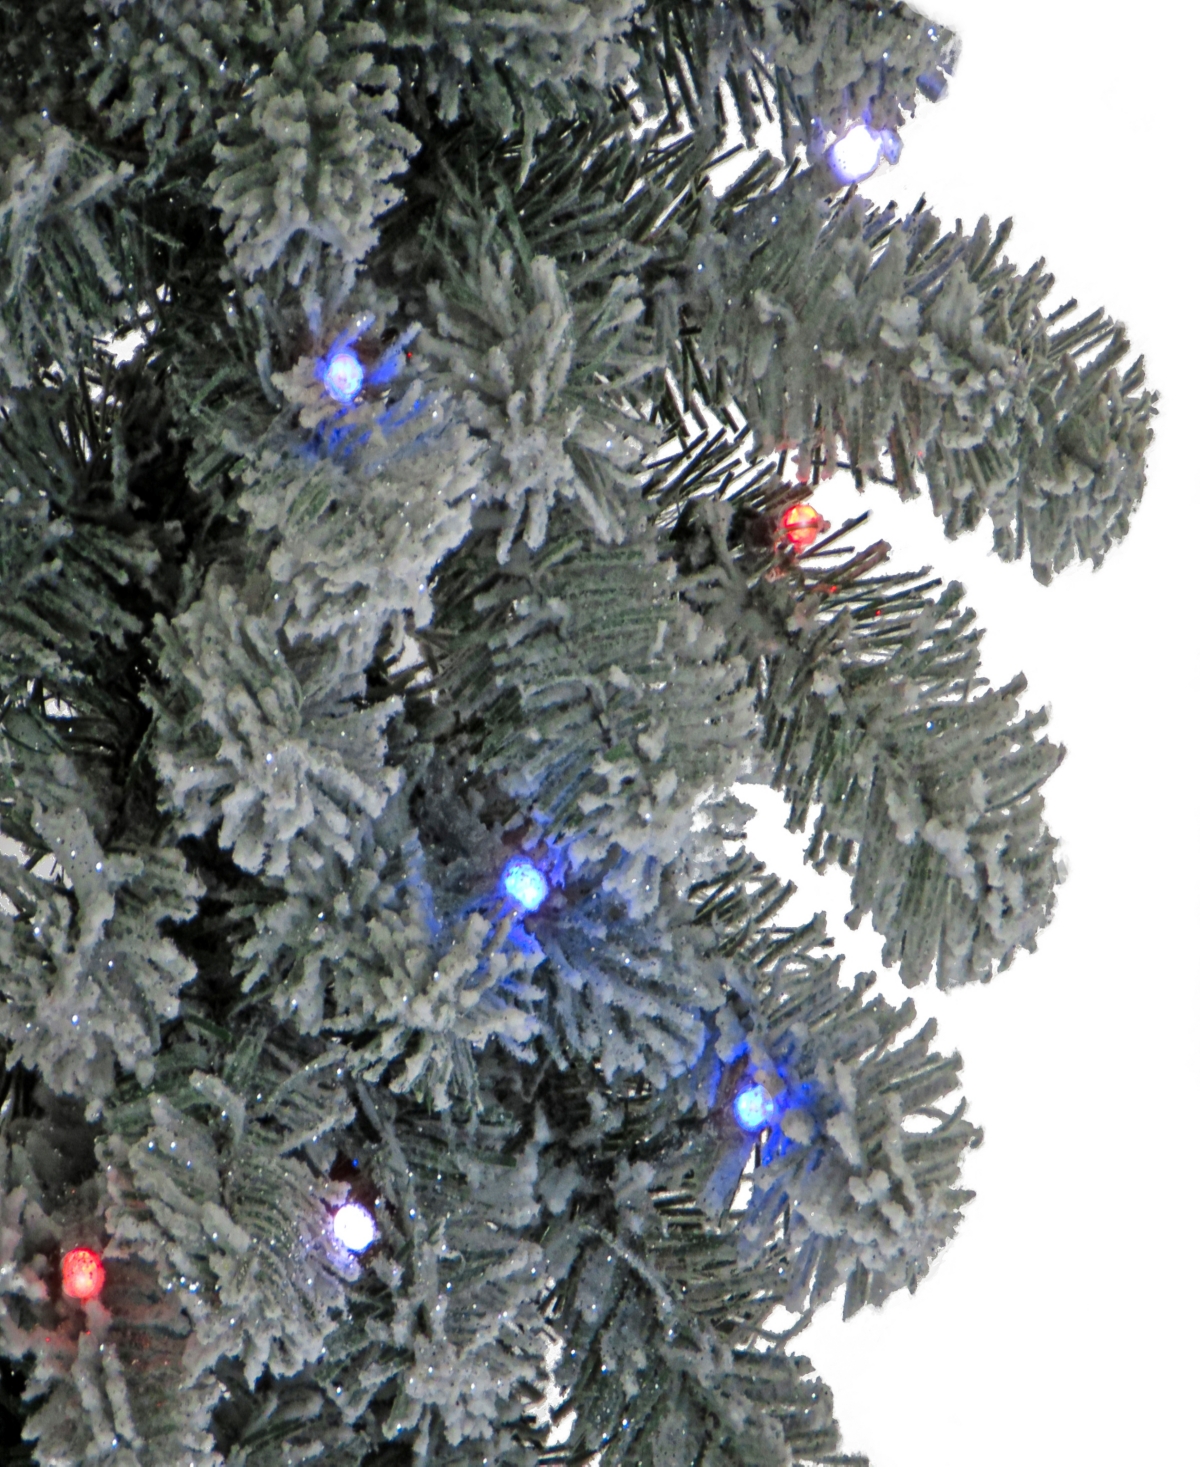 Shop National Tree Company 4' Snowy Sheffield Spruce Entrance Tree With Twinkly Led Lights In Green